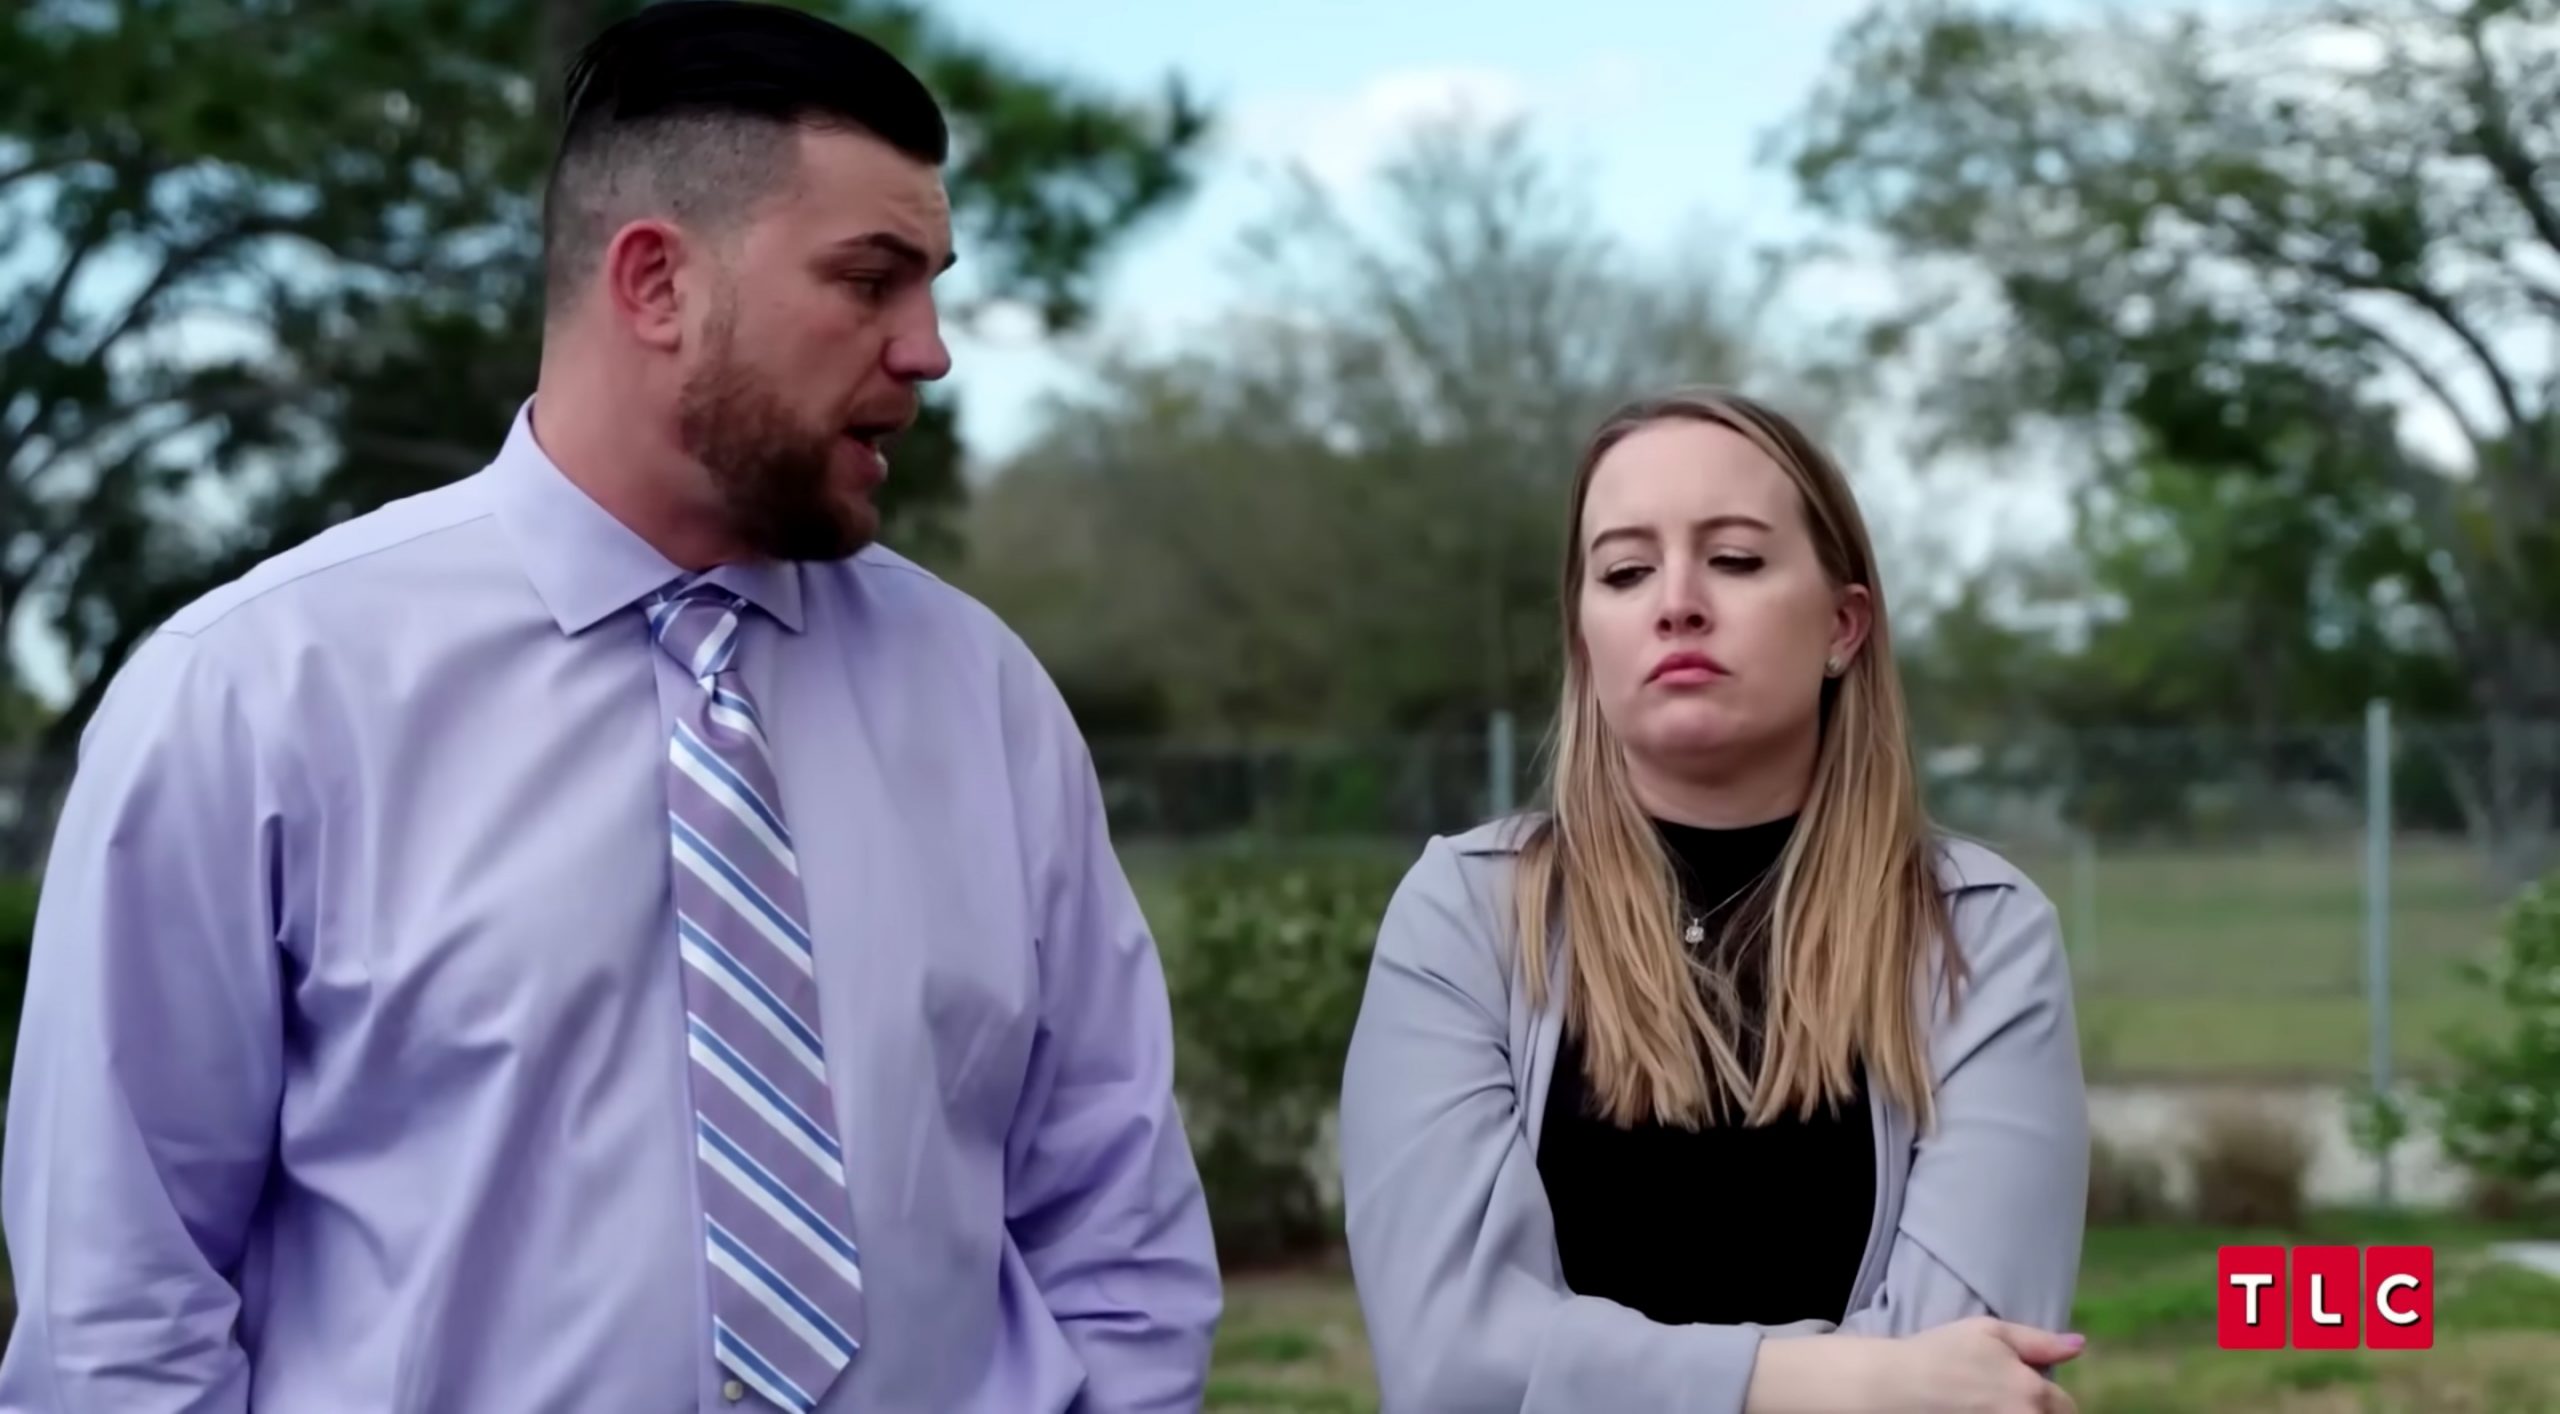 Andrei Castravet and Elizabeth 'Libby' Potthast standing outside together in trailer for '90 Day Fiancé: Happily Ever After?' Season 7 on TLC.